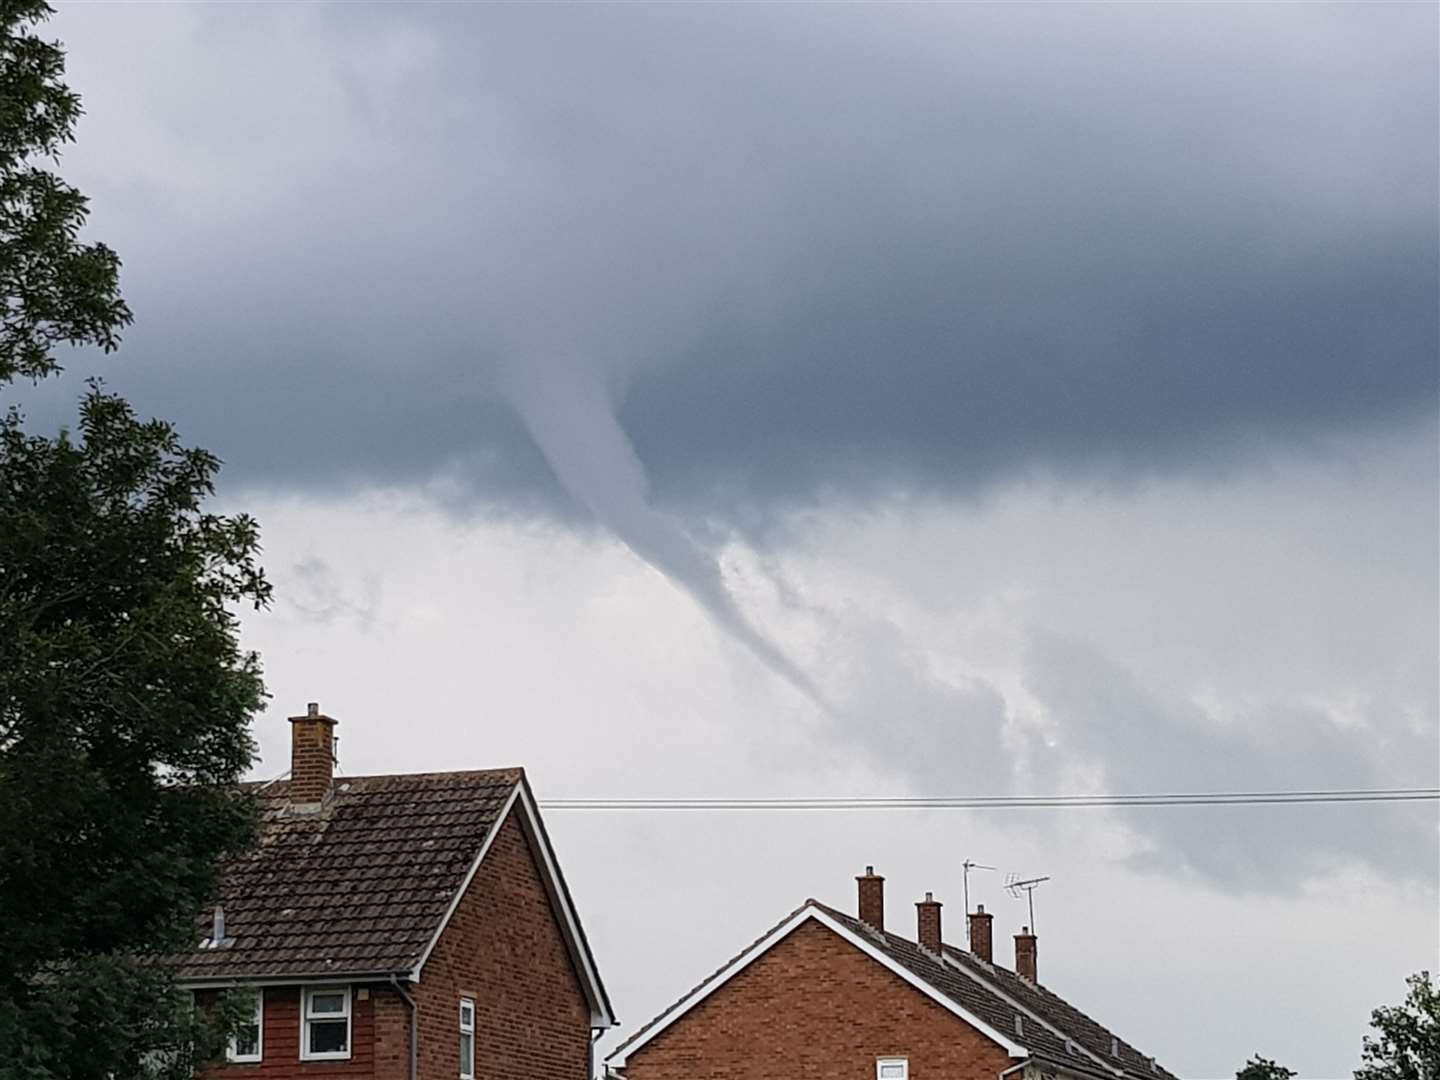 Mason Maclean took this photo of a funnel cloud over the Sittingbourne area on Sunday. Picture: Mason Maclean